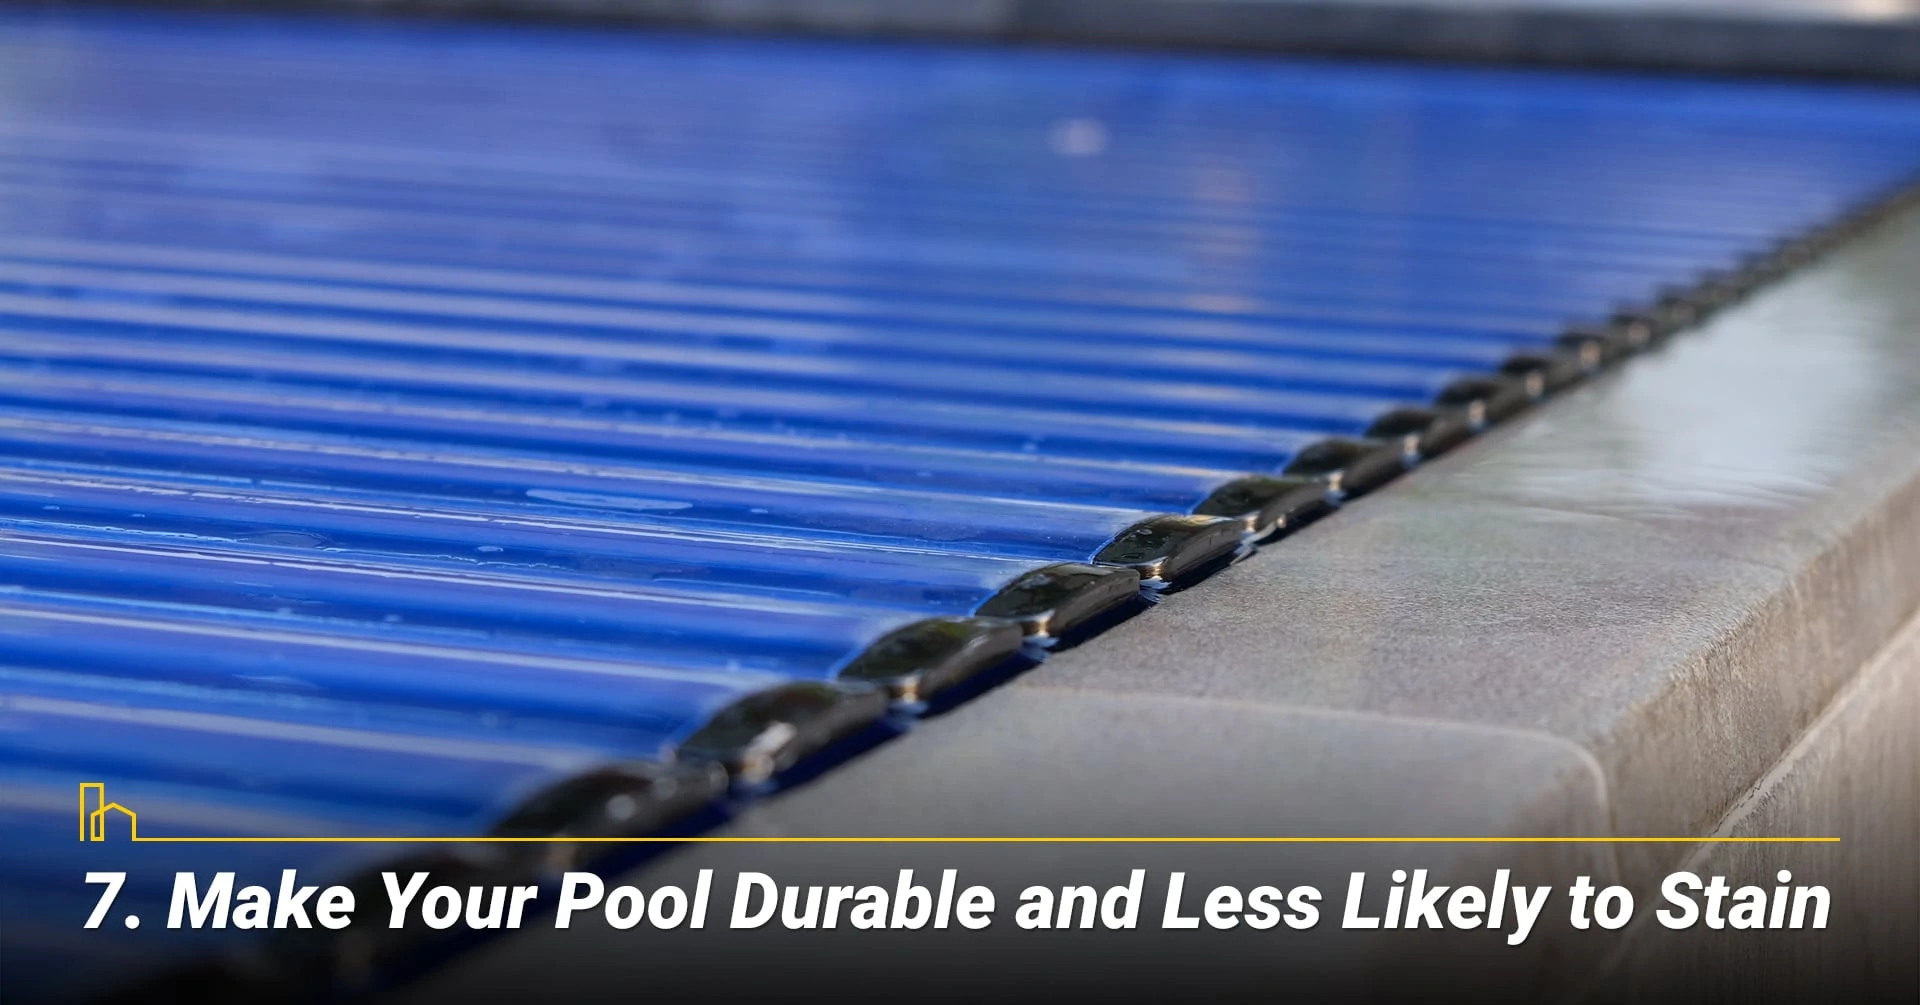 Make Your Pool Durable and Less Likely to Stain, maintain the good shape